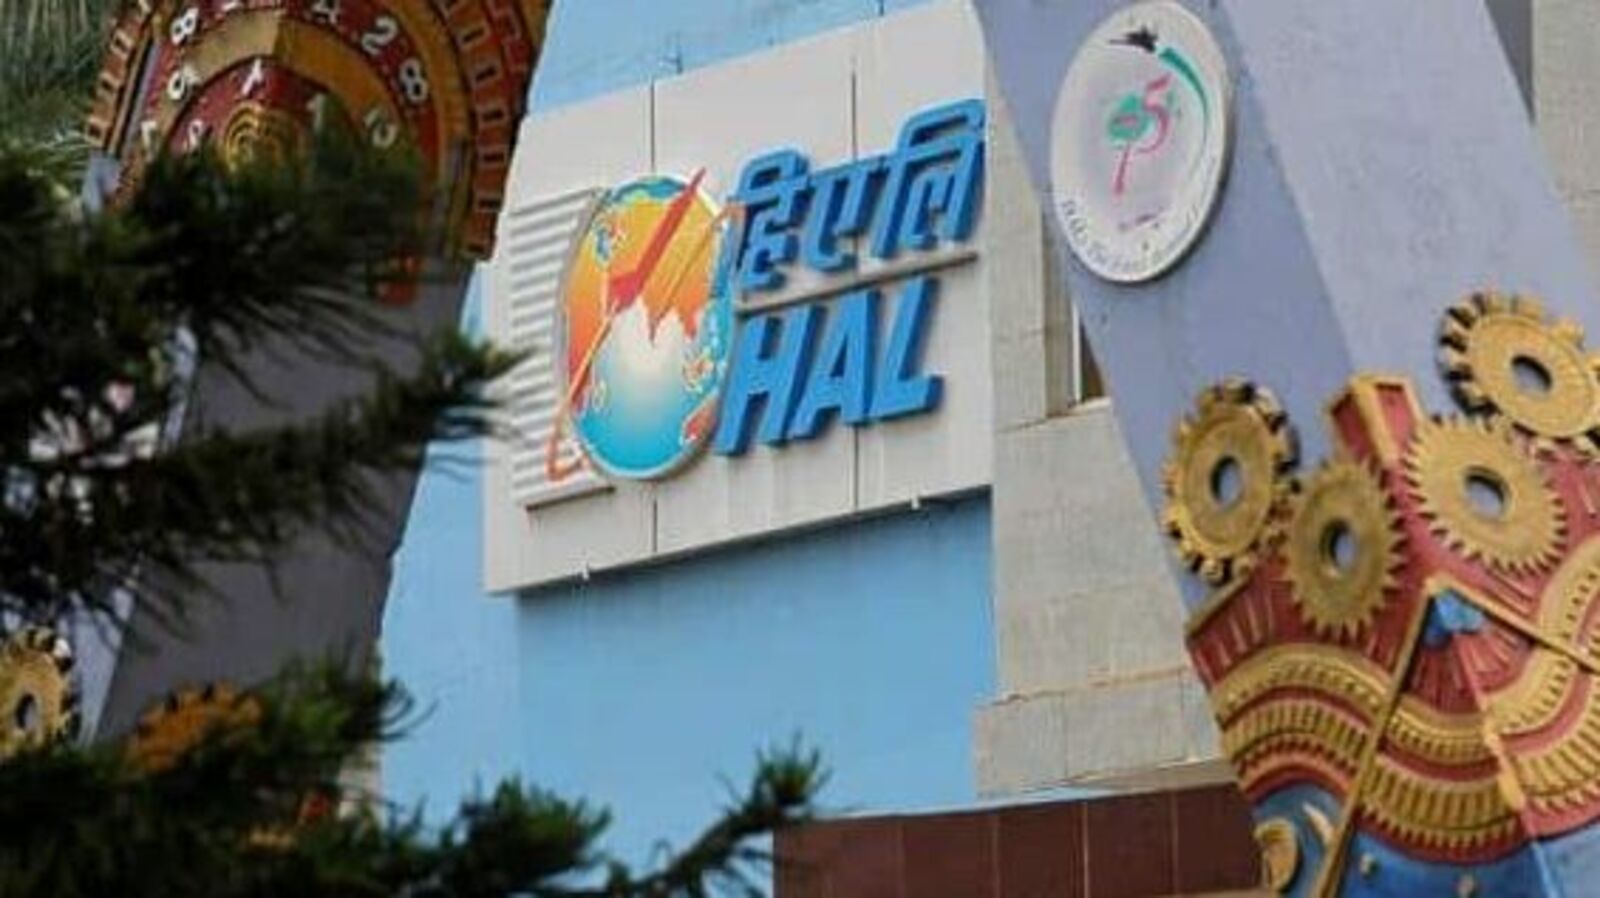 HAL stock: Elara Securities raises target price, shares rallied over 120% in 6 months